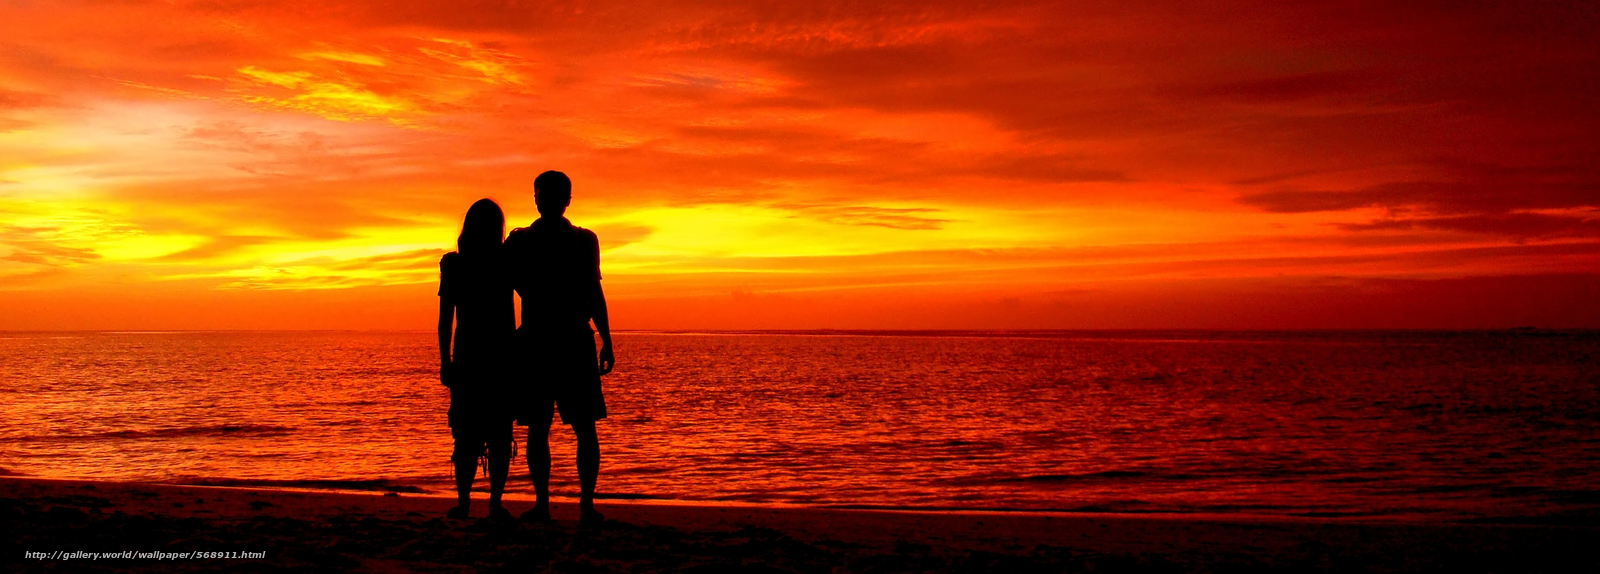 Download Wallpaper Couple In Love, Romantic Silhouette, - Romantic Couple In Beach Sunset , HD Wallpaper & Backgrounds